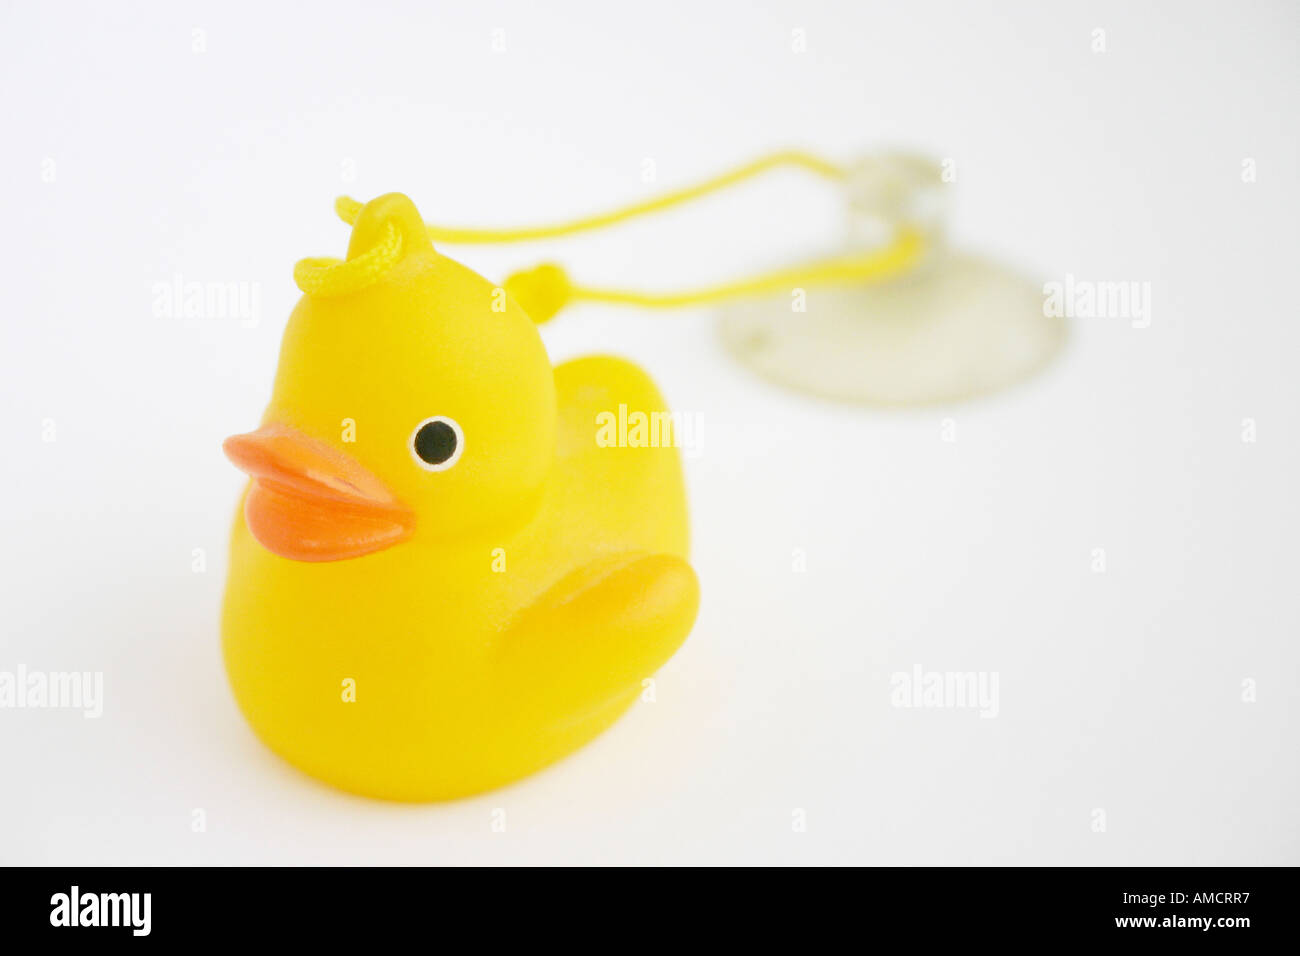 Rubber duck close up Stock Photo